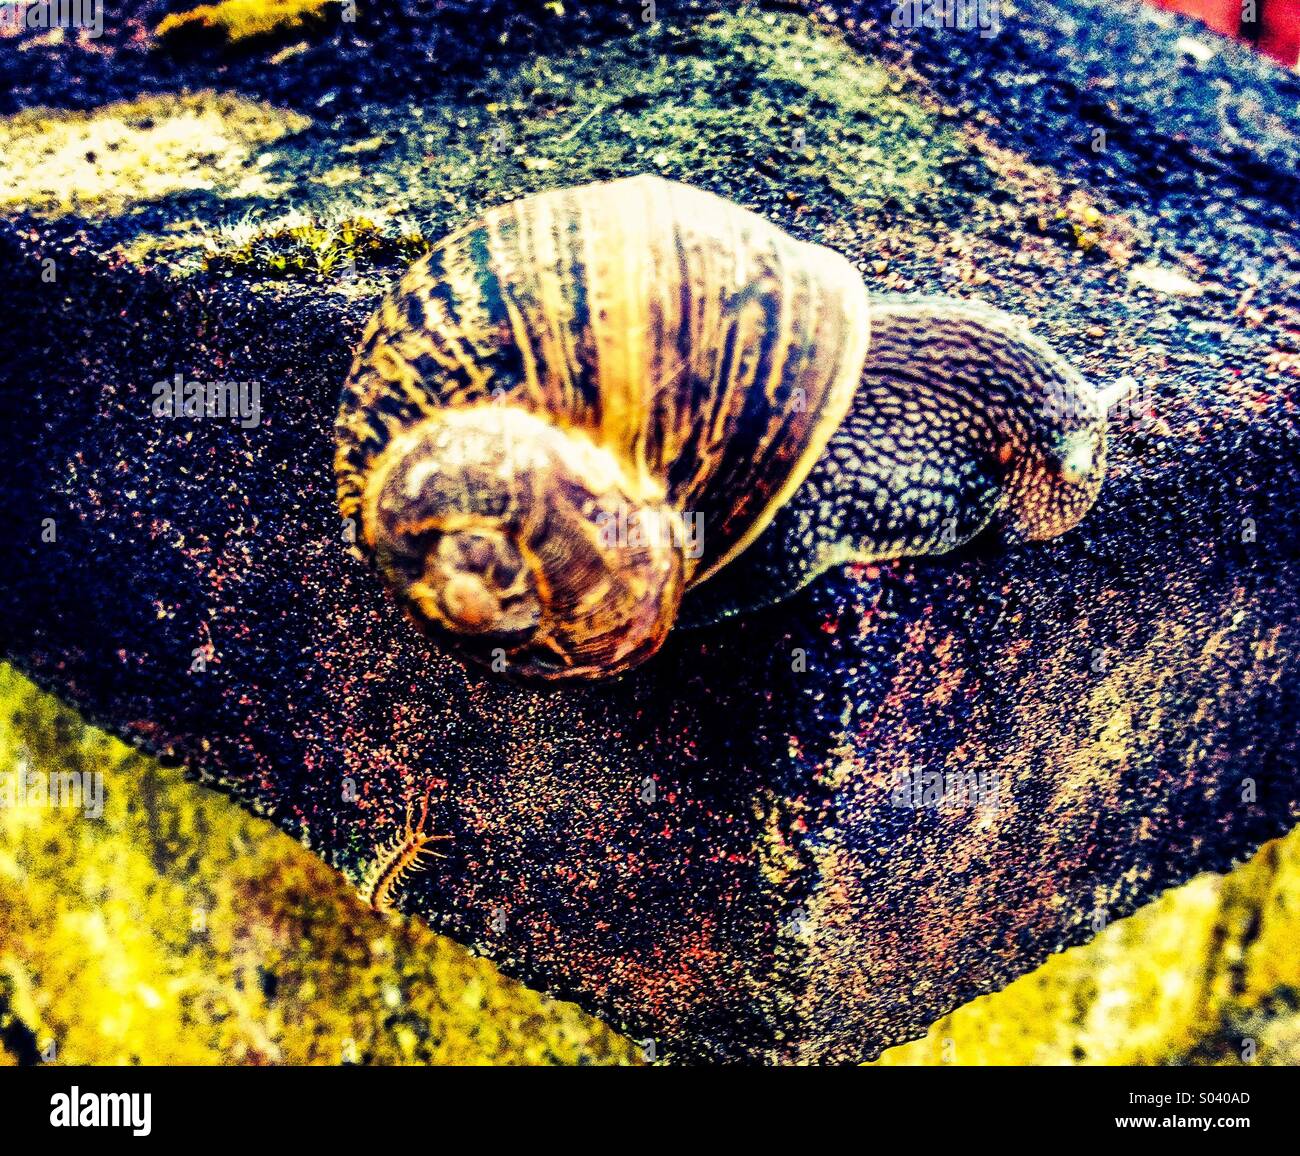 Centipede sneaking up on a cowering snail Stock Photo